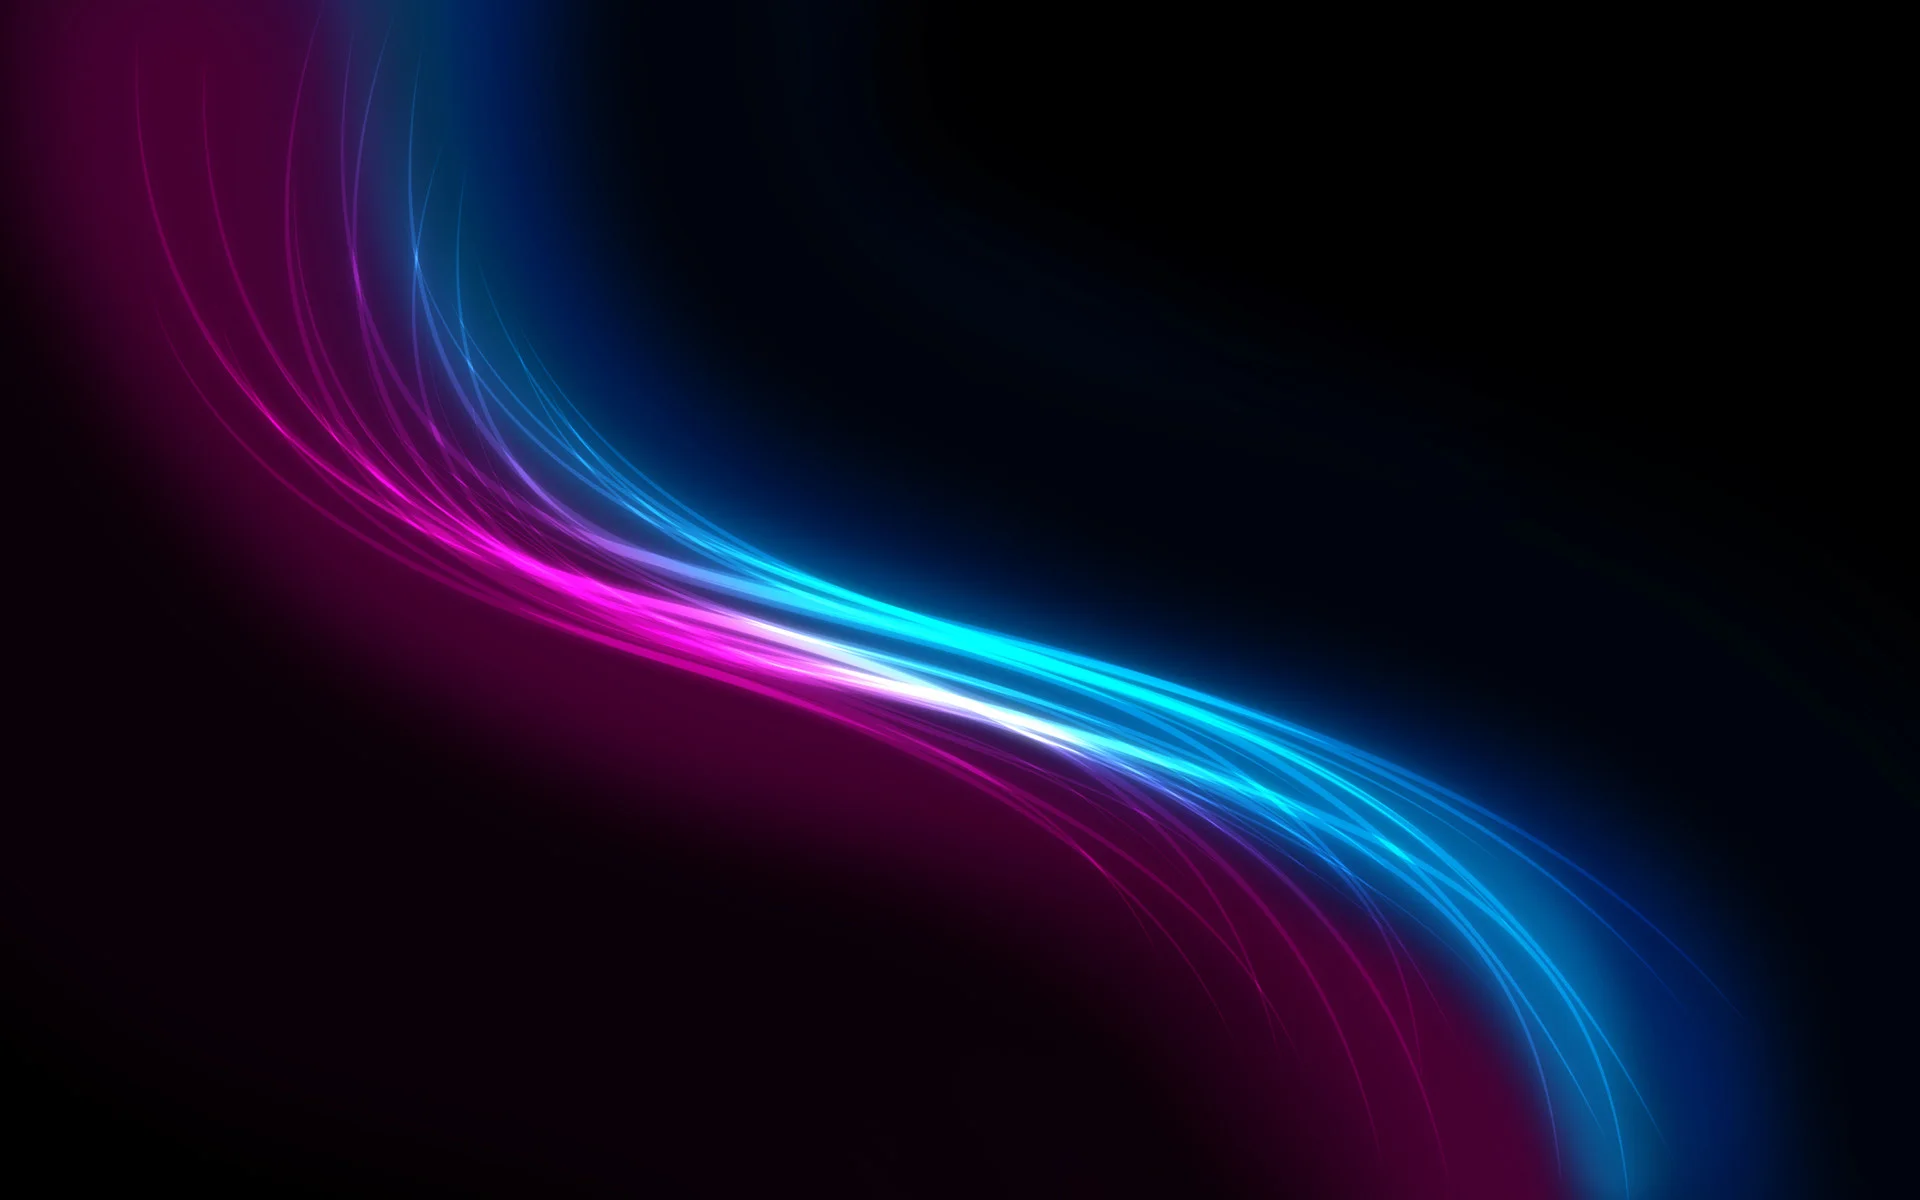 Background Blue Swirl Scenic Purple Backgrounds wallpapers HD free .